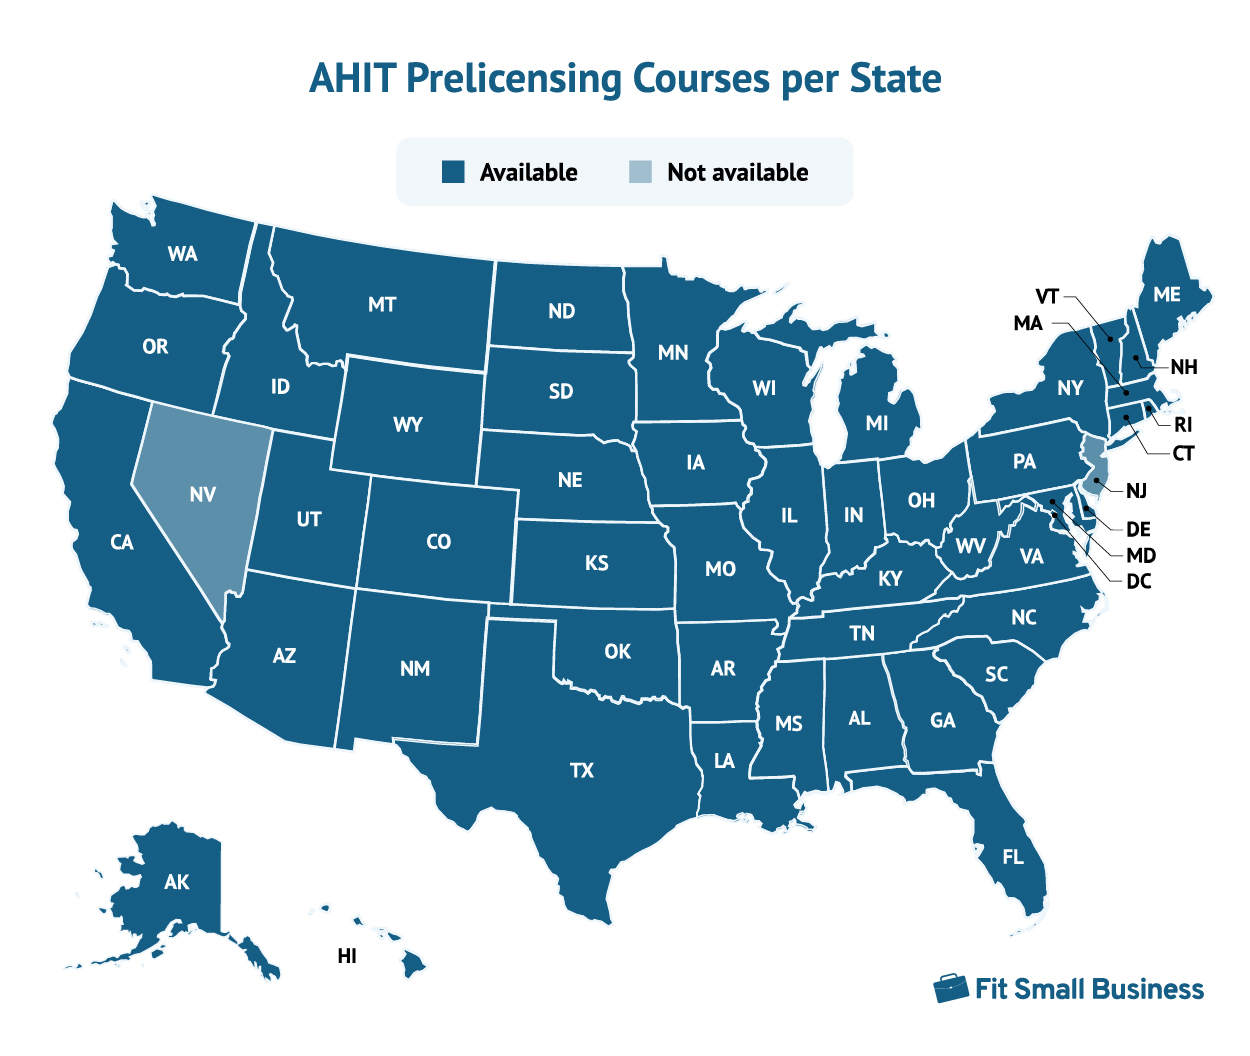 The map showing for a AHIT Prelicensing Courses per State.